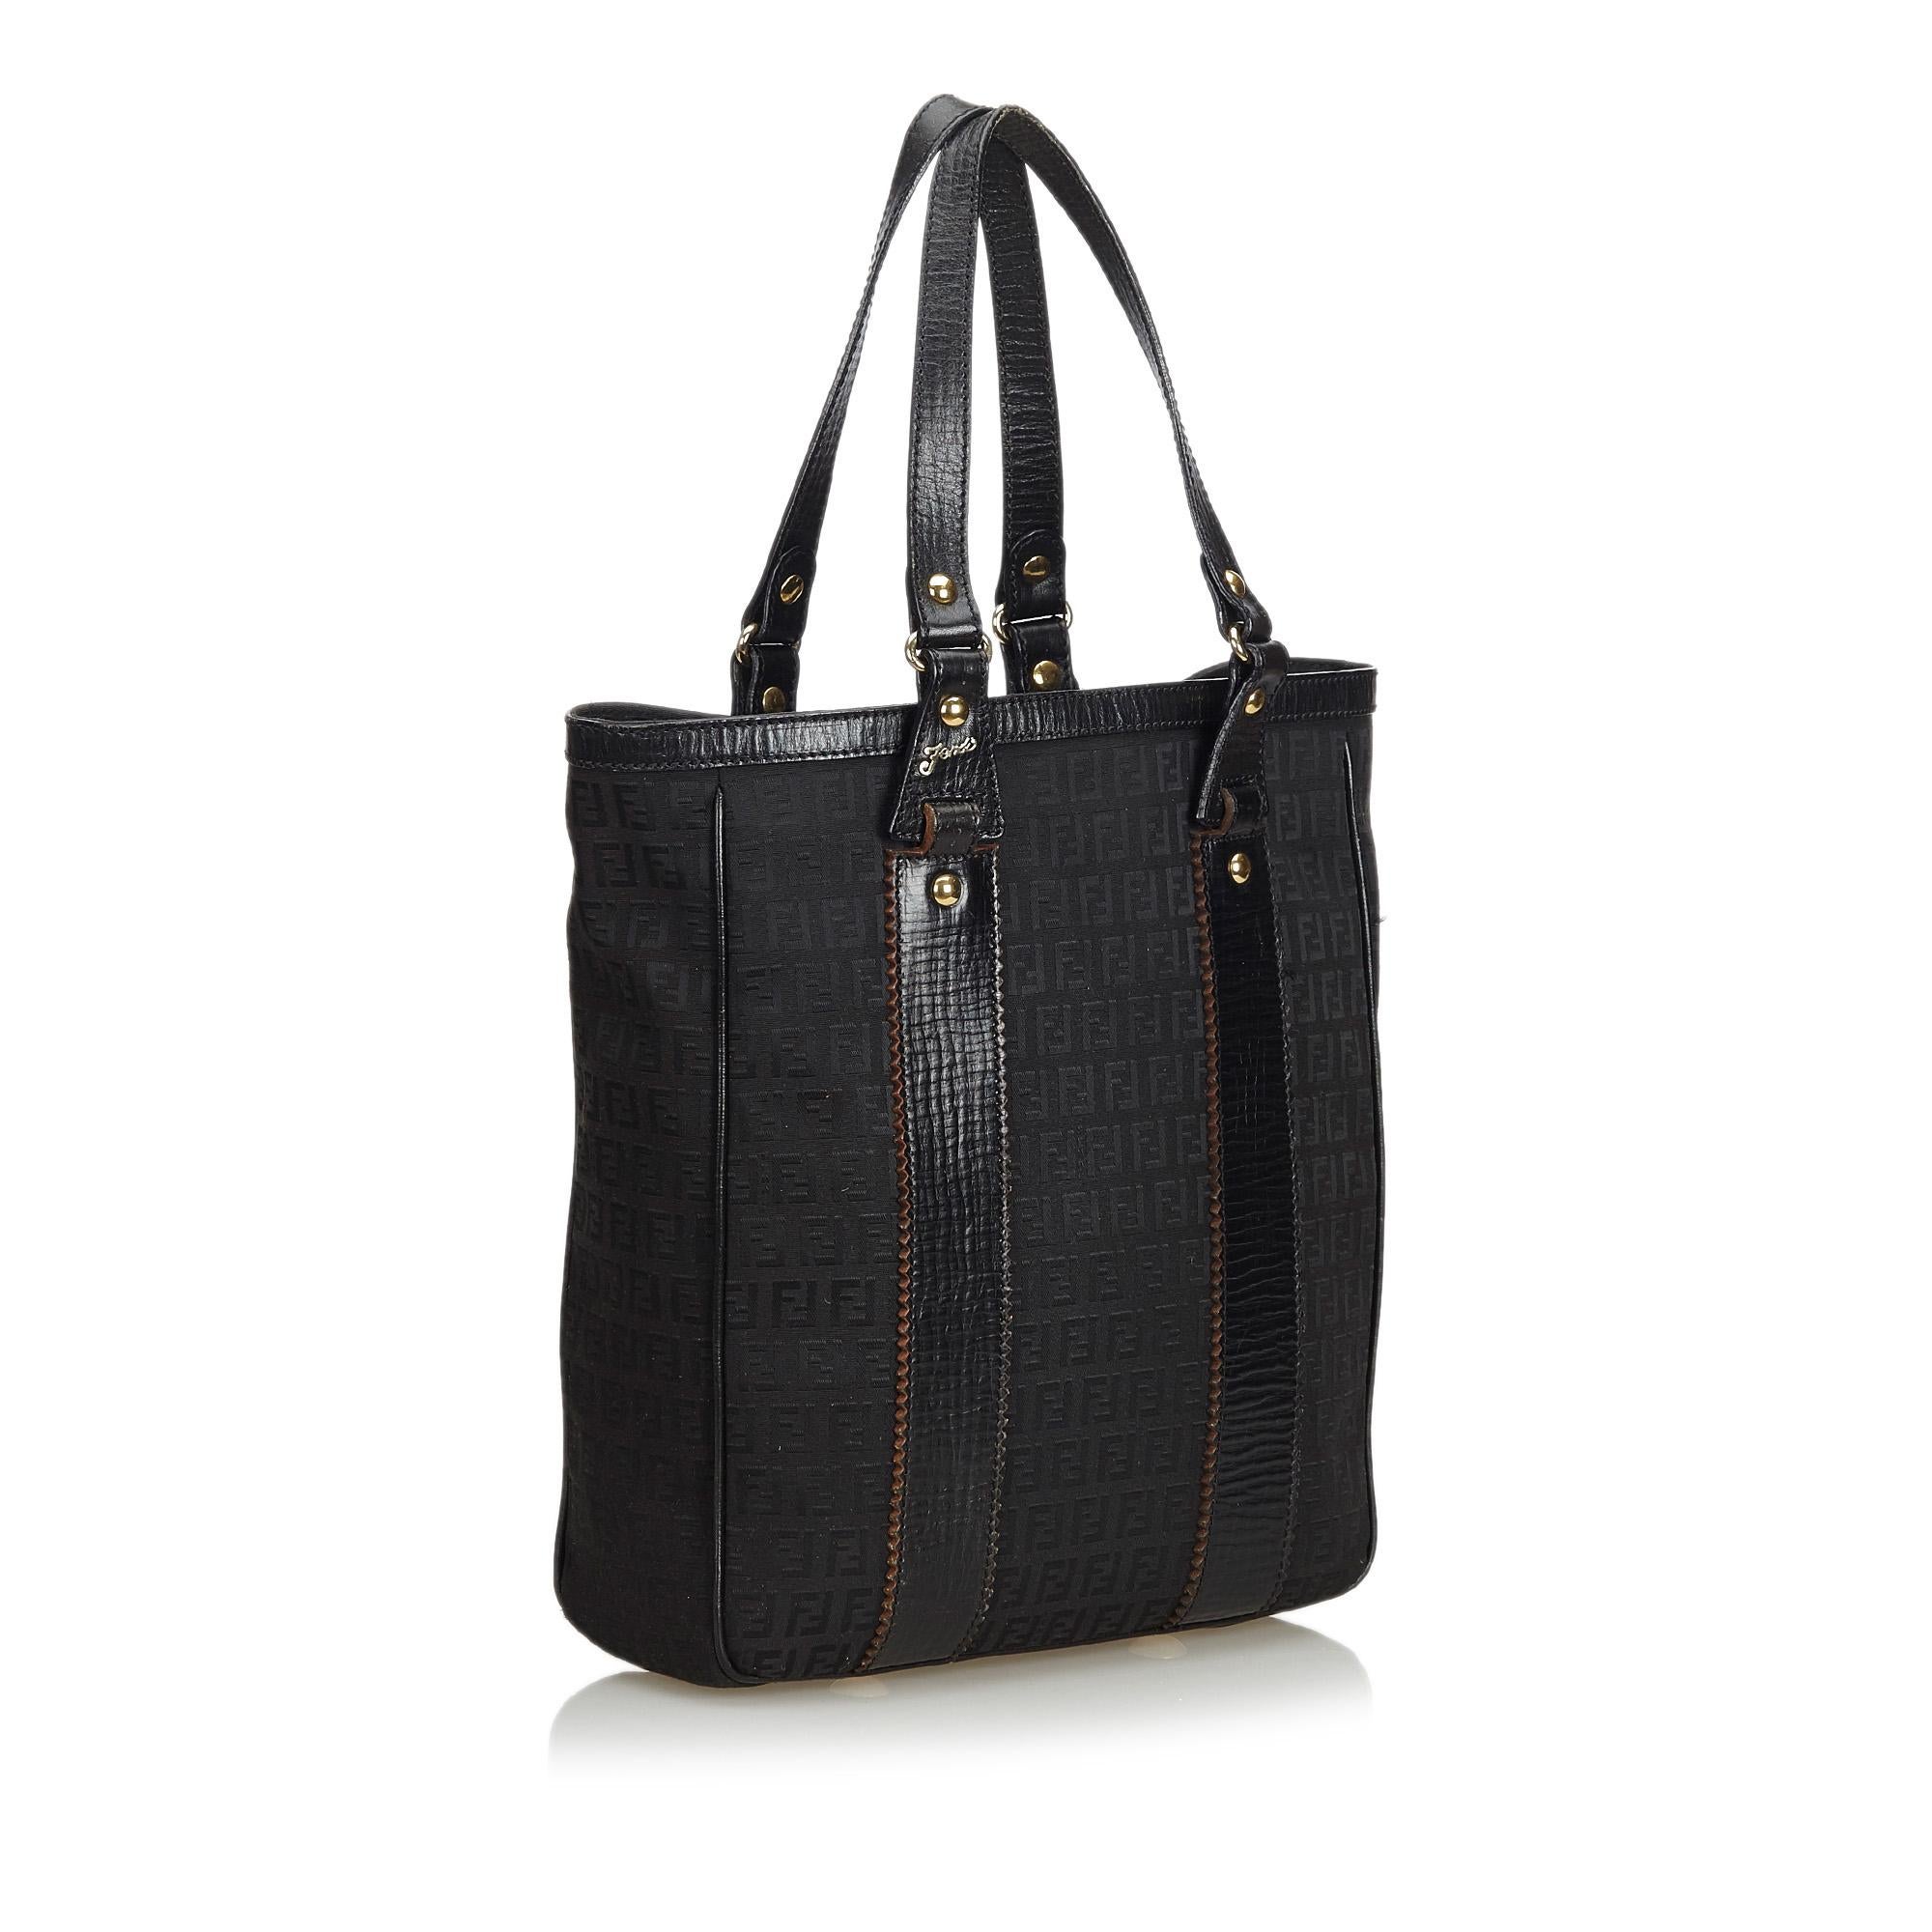 This tote bag features a canvas body with leather trim, flat leather straps, a top zip closure, and interior zip pockets. It carries as AB condition rating.

Inclusions: 
This item does not come with inclusions.

Dimensions:
Length: 34.00 cm
Width: